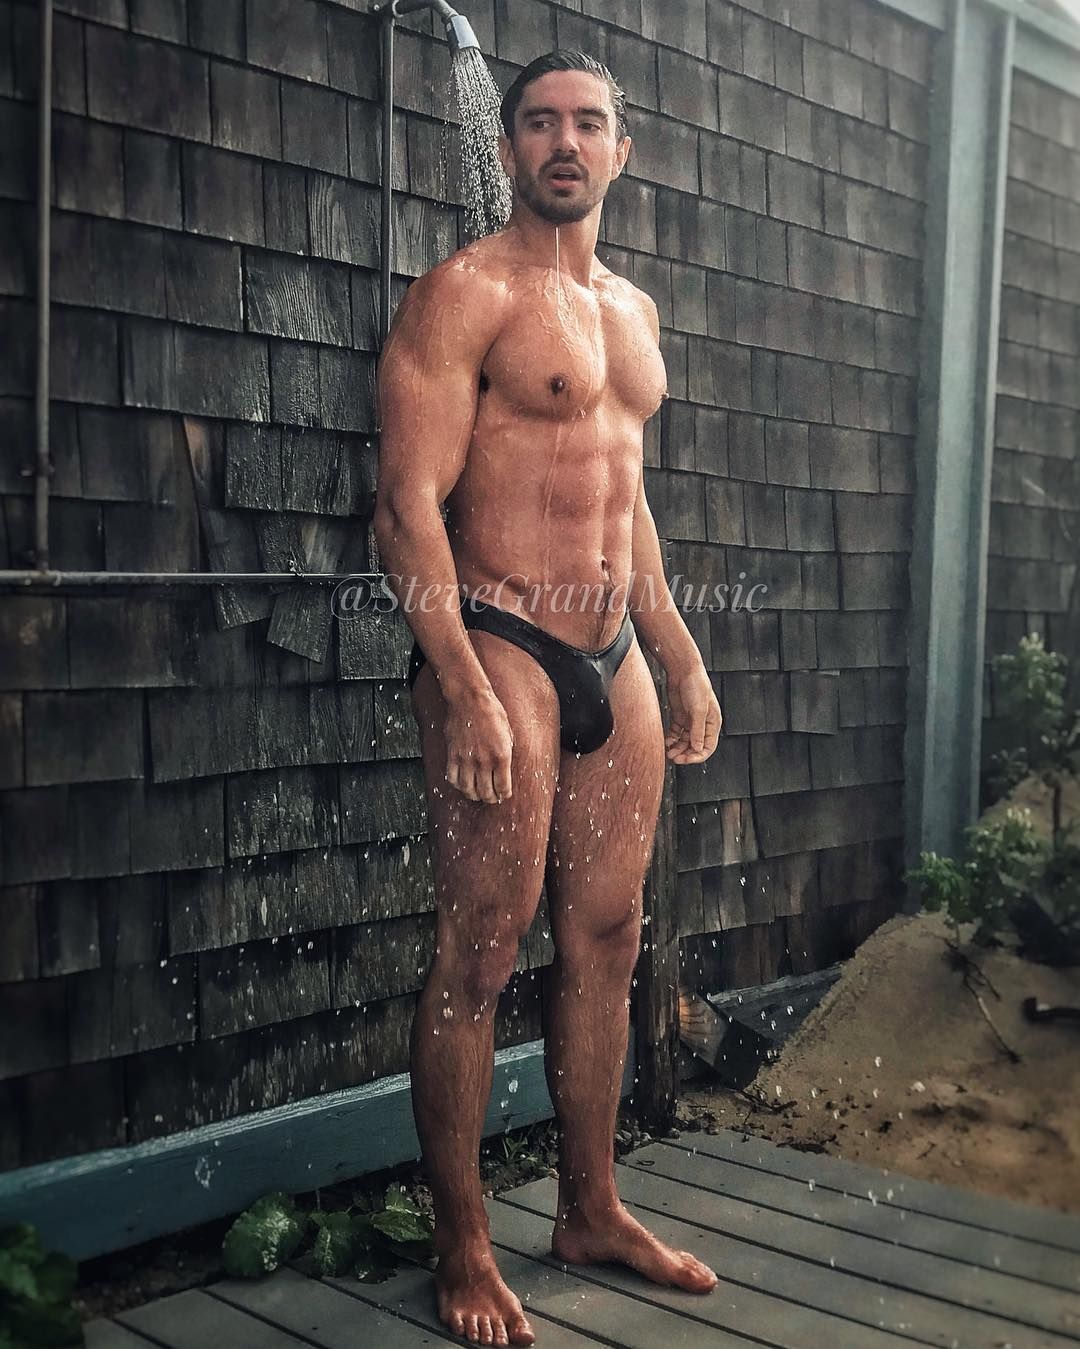 Country singer Steve Grand showing his big bulge and penis outlines.